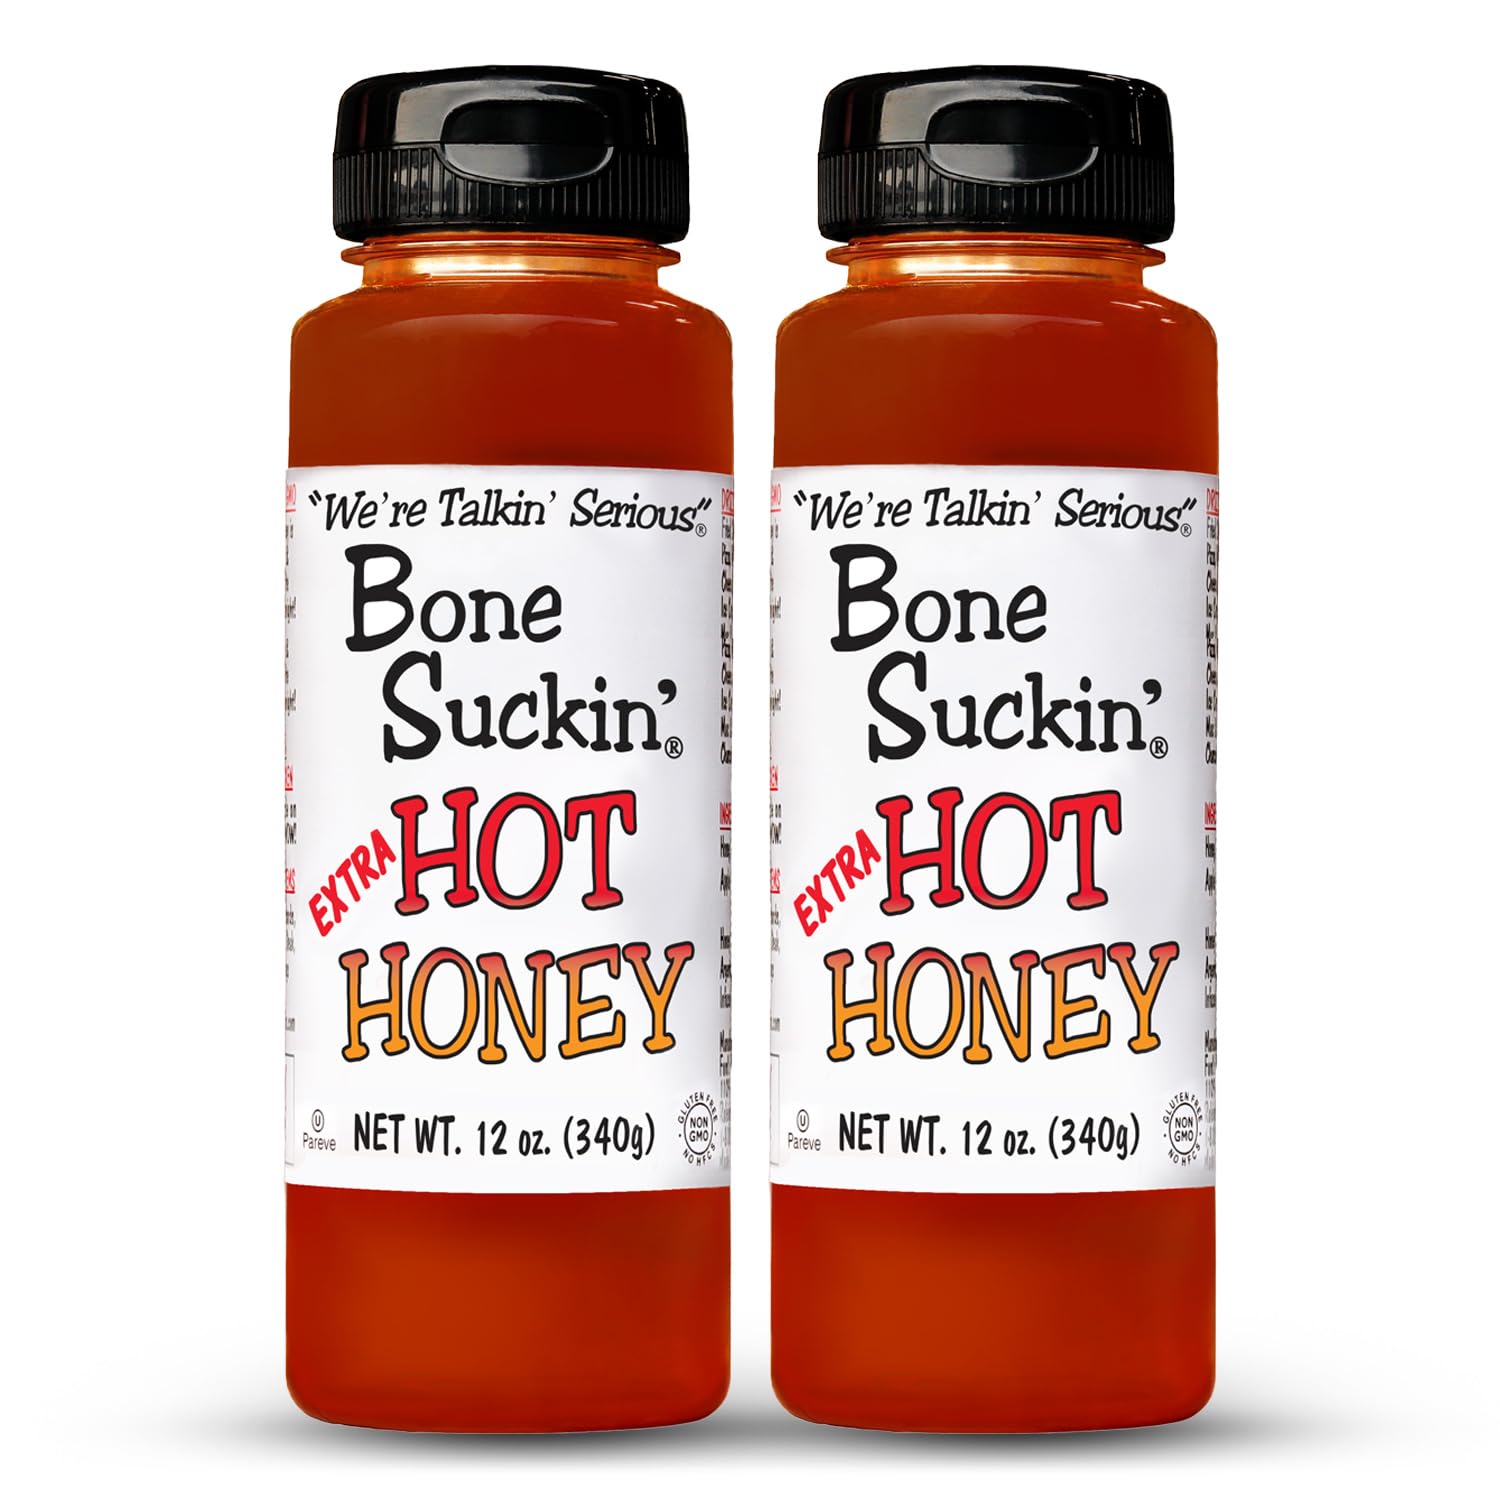 Bone Suckin' Extra Hot Honey, 12 oz. 2 pack Made with high-quality Non GMO, Kosher, Pareve, Gluten Free, Dairy Free ingredients with No High Fructose Syrup: Bone Suckin' Extra Hot Honey is crafted using the perfect blend of high quality honey, apple cider vinegar, and chili extract, ensuring a delicious sweet, hot & flavorful experience that is great for the whole family!